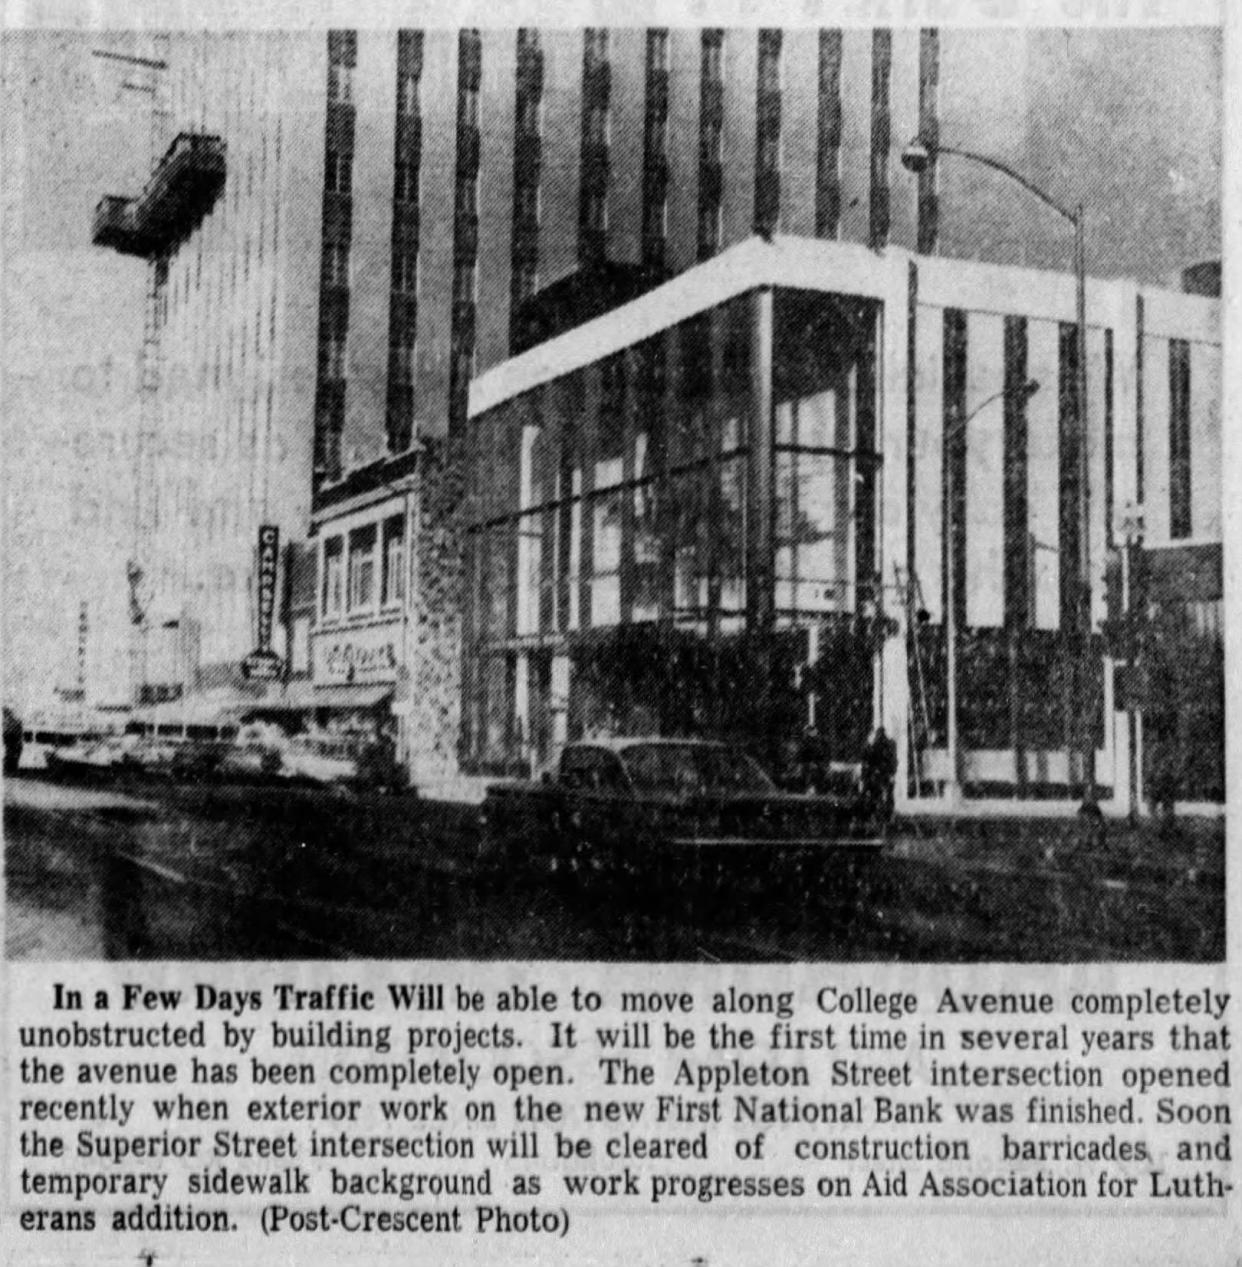 A photo in the Nov. 9, 1964, edition of The Post-Crescent shows the First National Bank building on College Avenue.